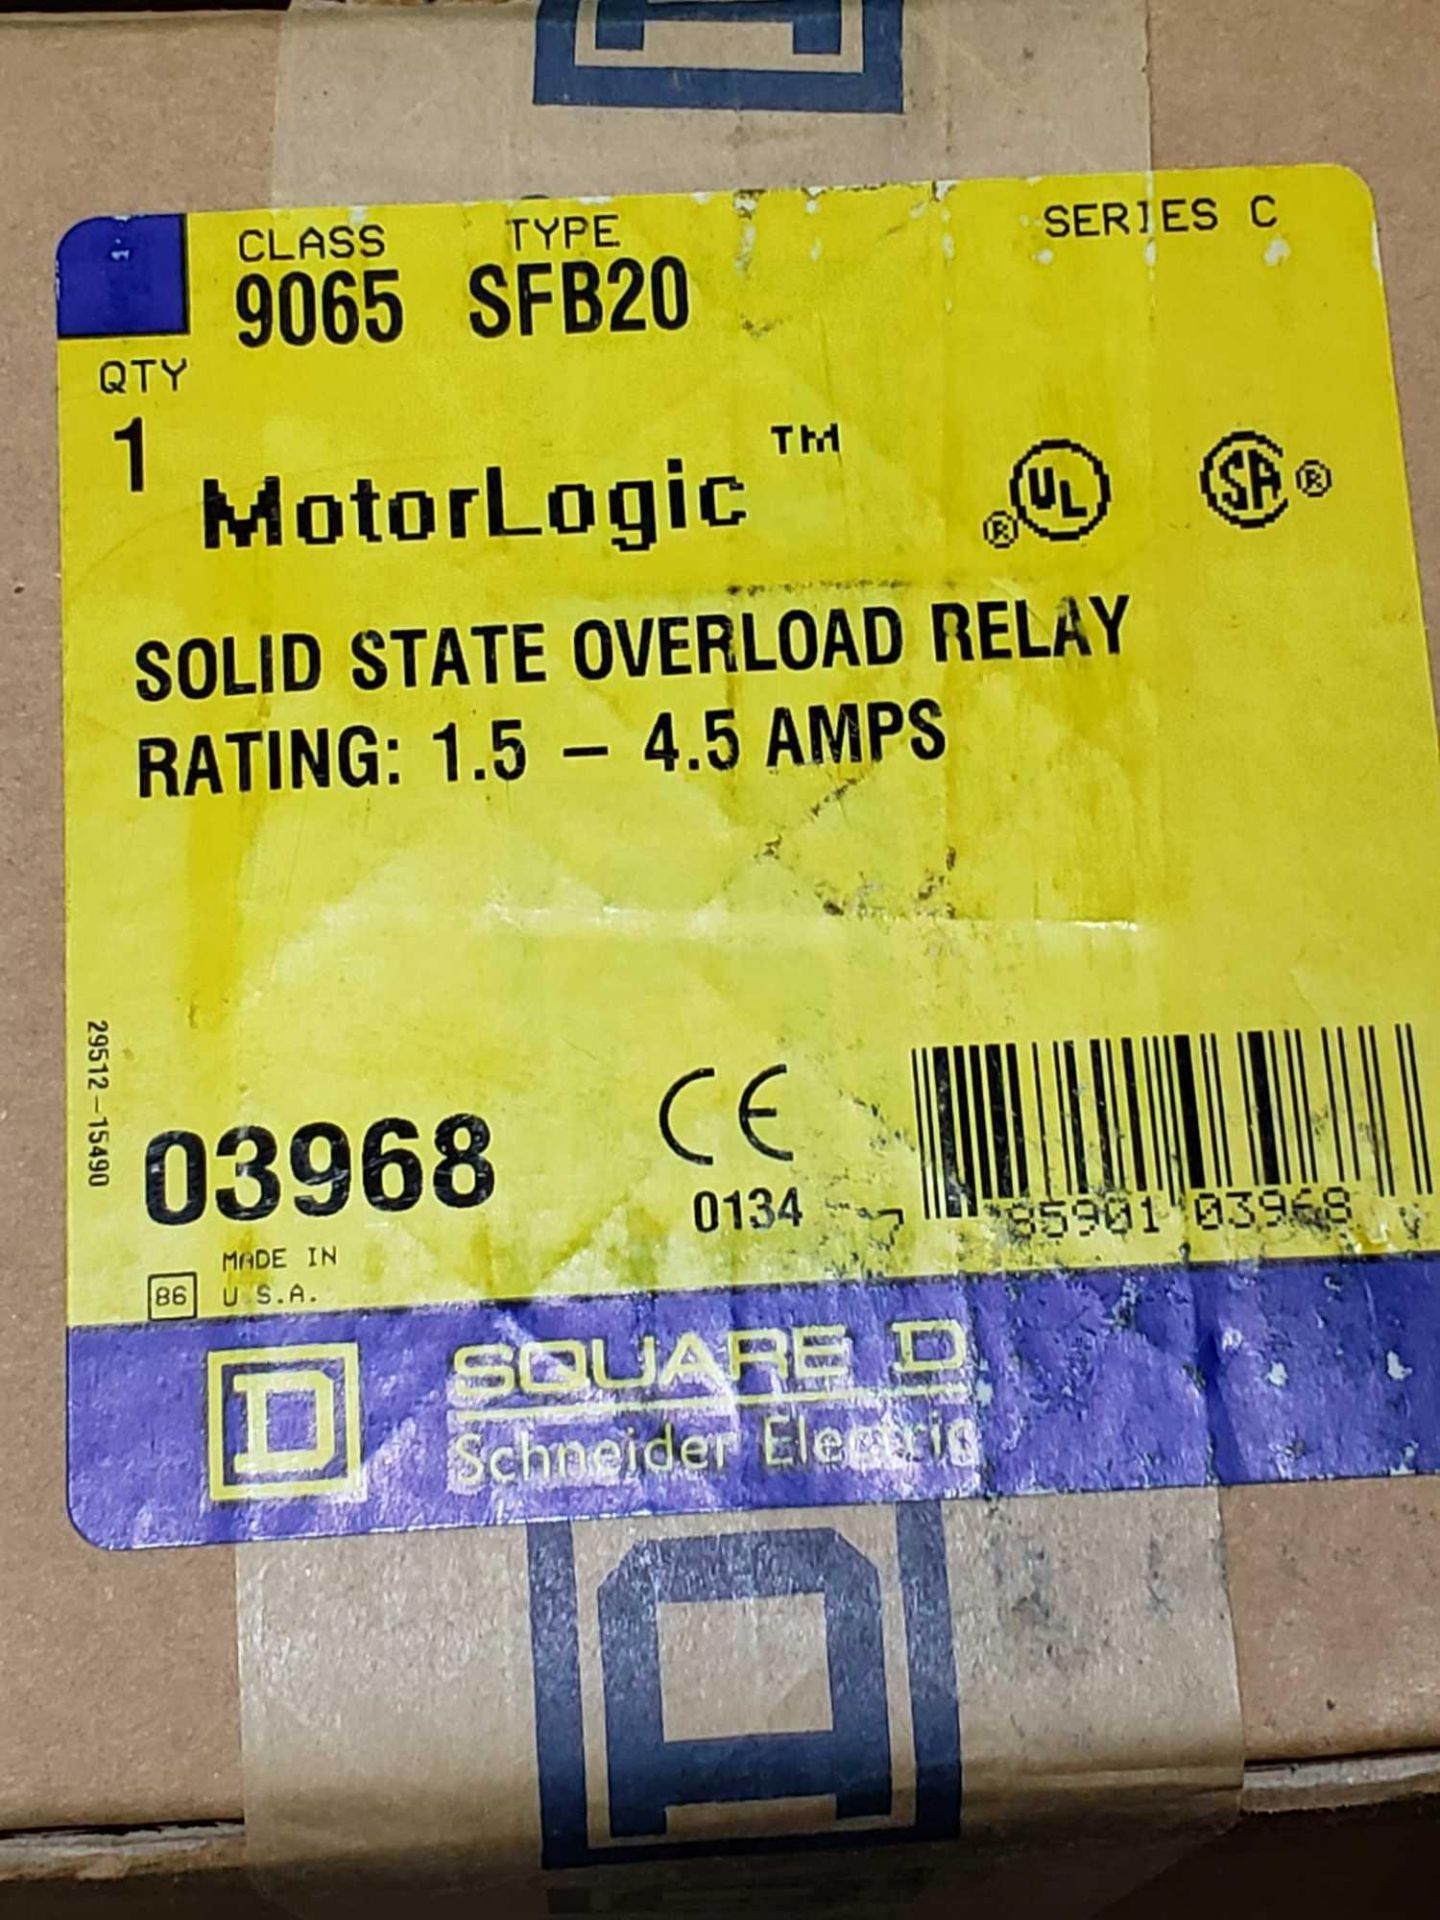 Square D motor logic class 9065 type SFB20. New in box. - Image 2 of 2